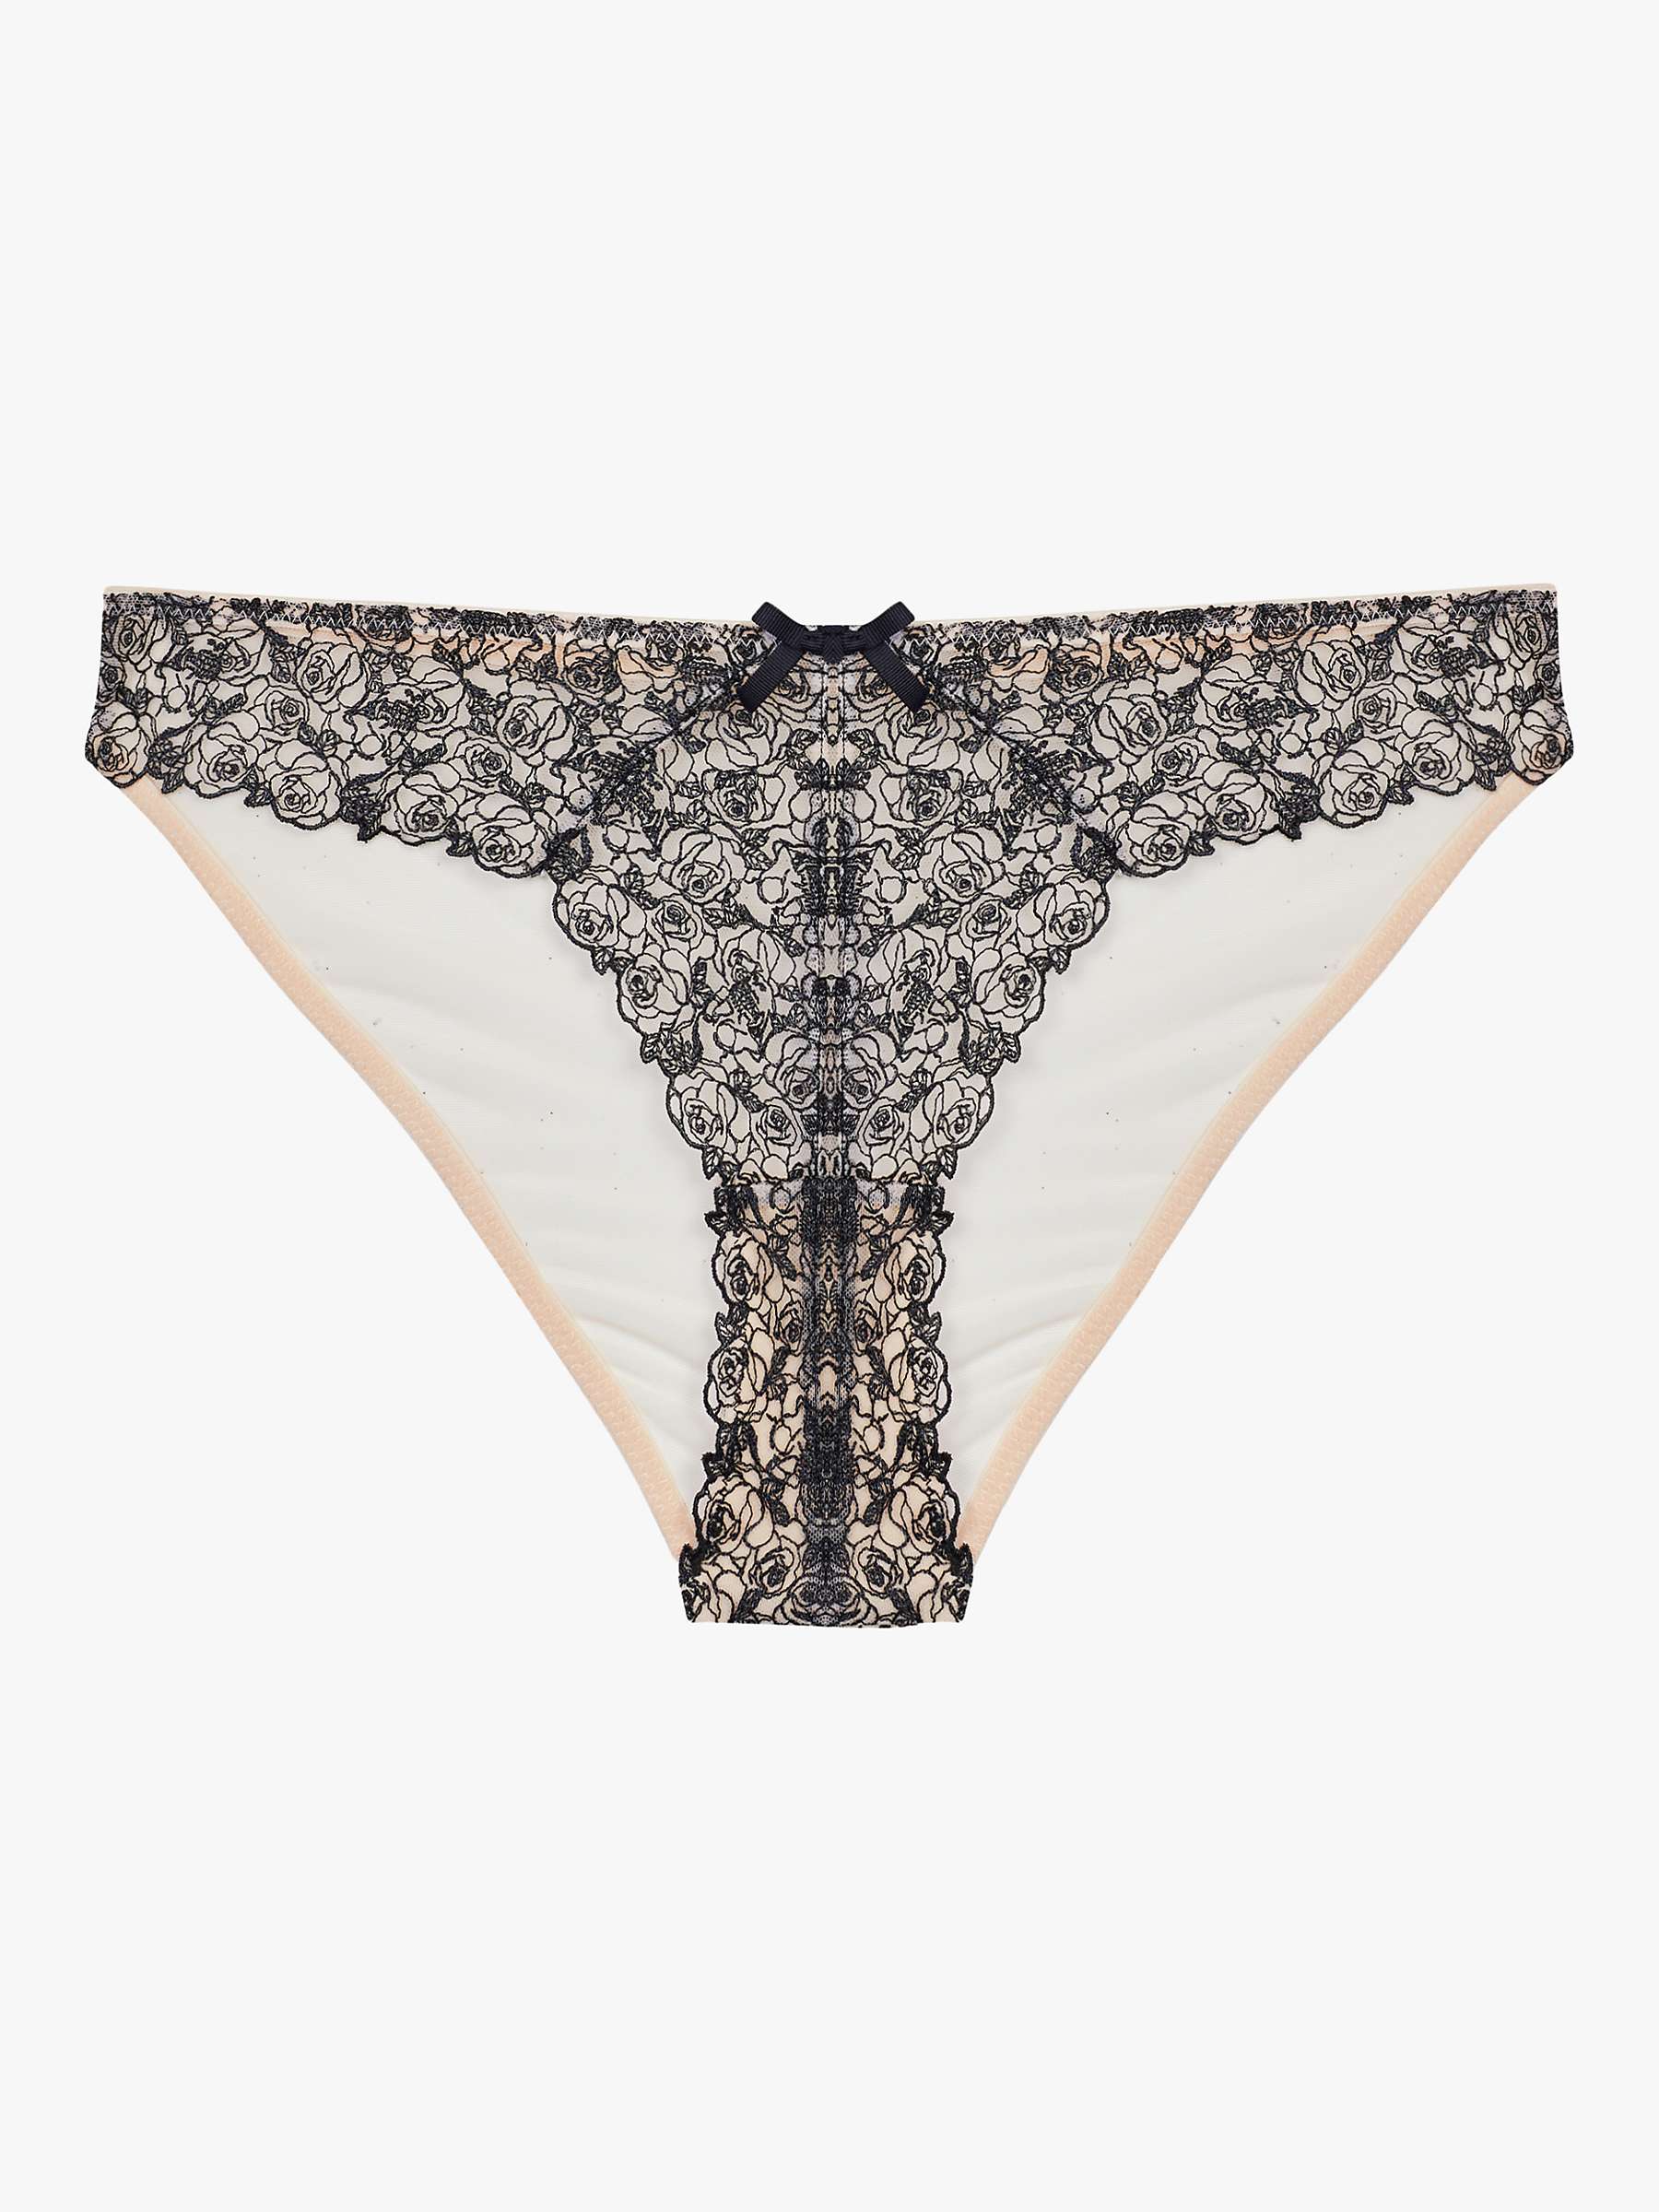 Buy Playful Promises Skull And Roses Brazilian Knickers, Peach/Black Online at johnlewis.com